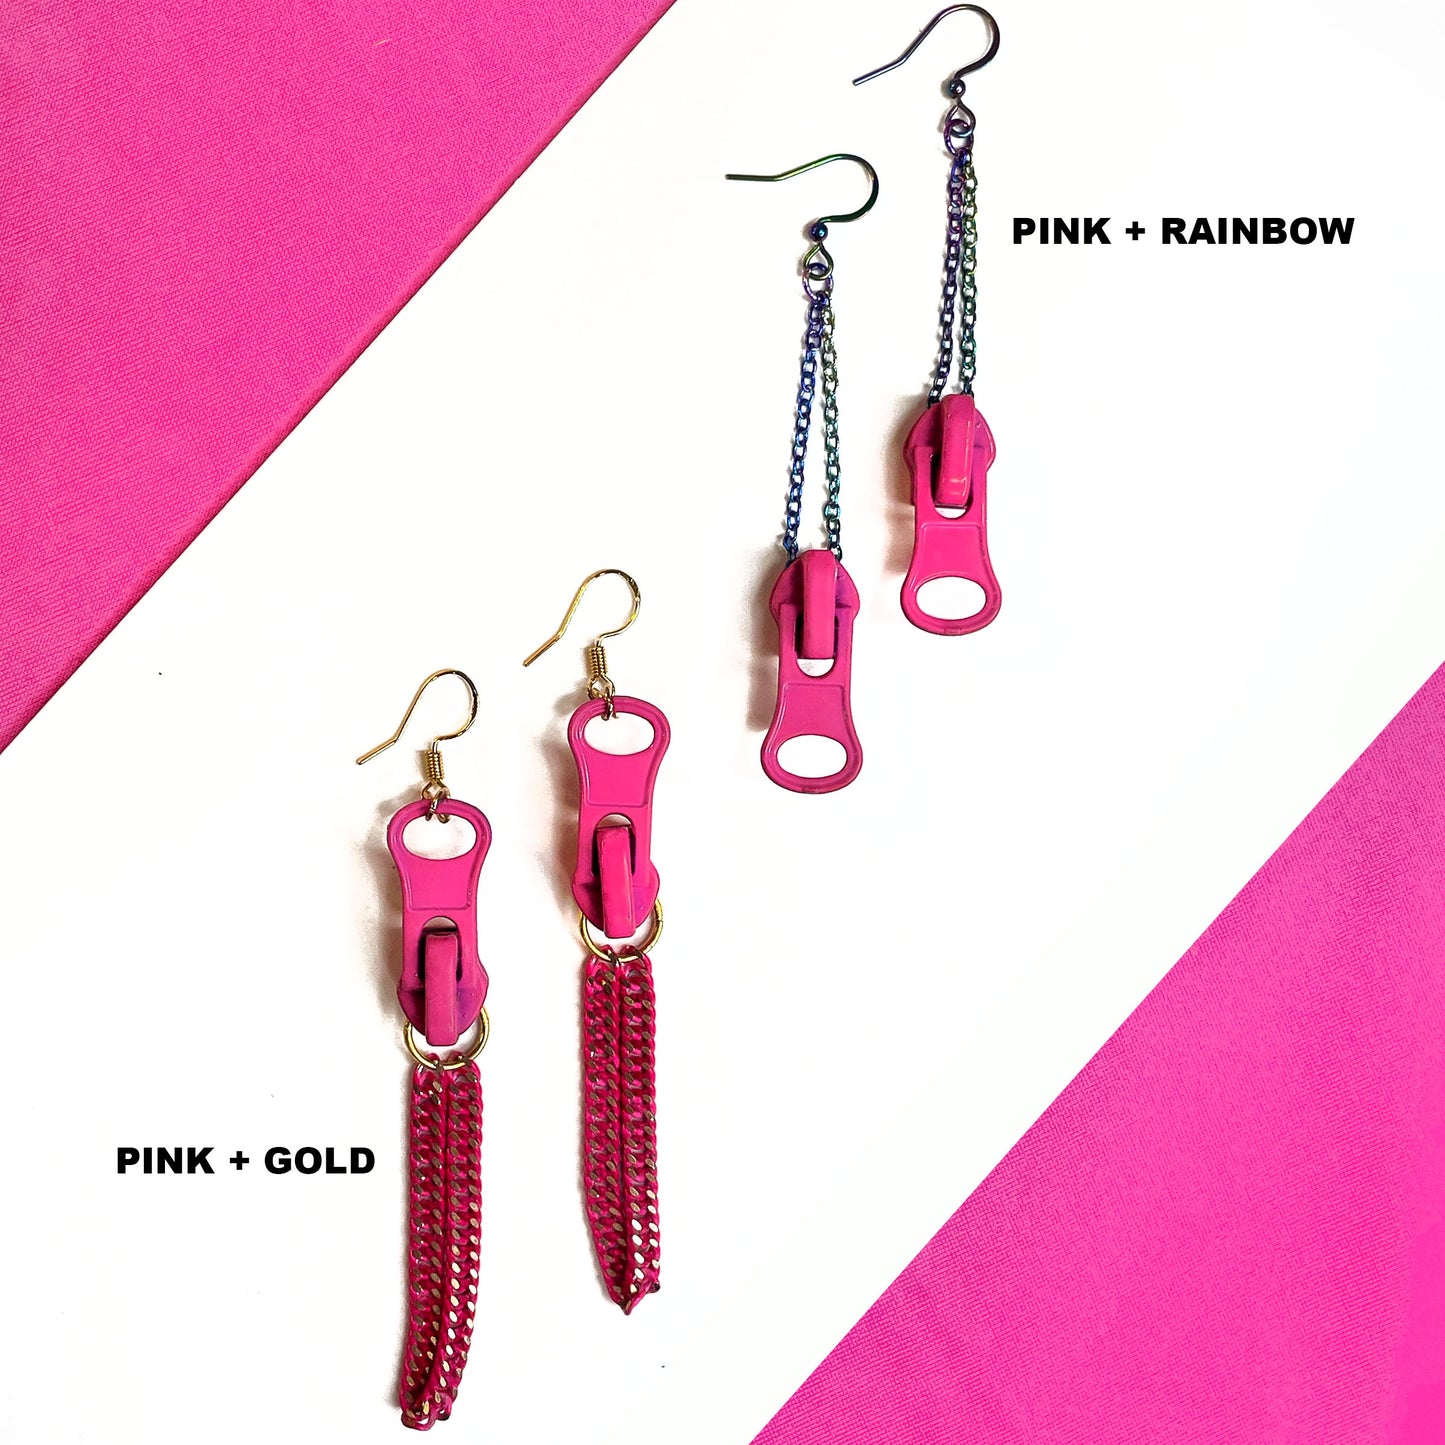 she-bang is upcycled handmade unique pink zipper earrings, unique jewelry, made from recycled materials and chains, completely one of a kind jewelry made by local brooklyn designers.